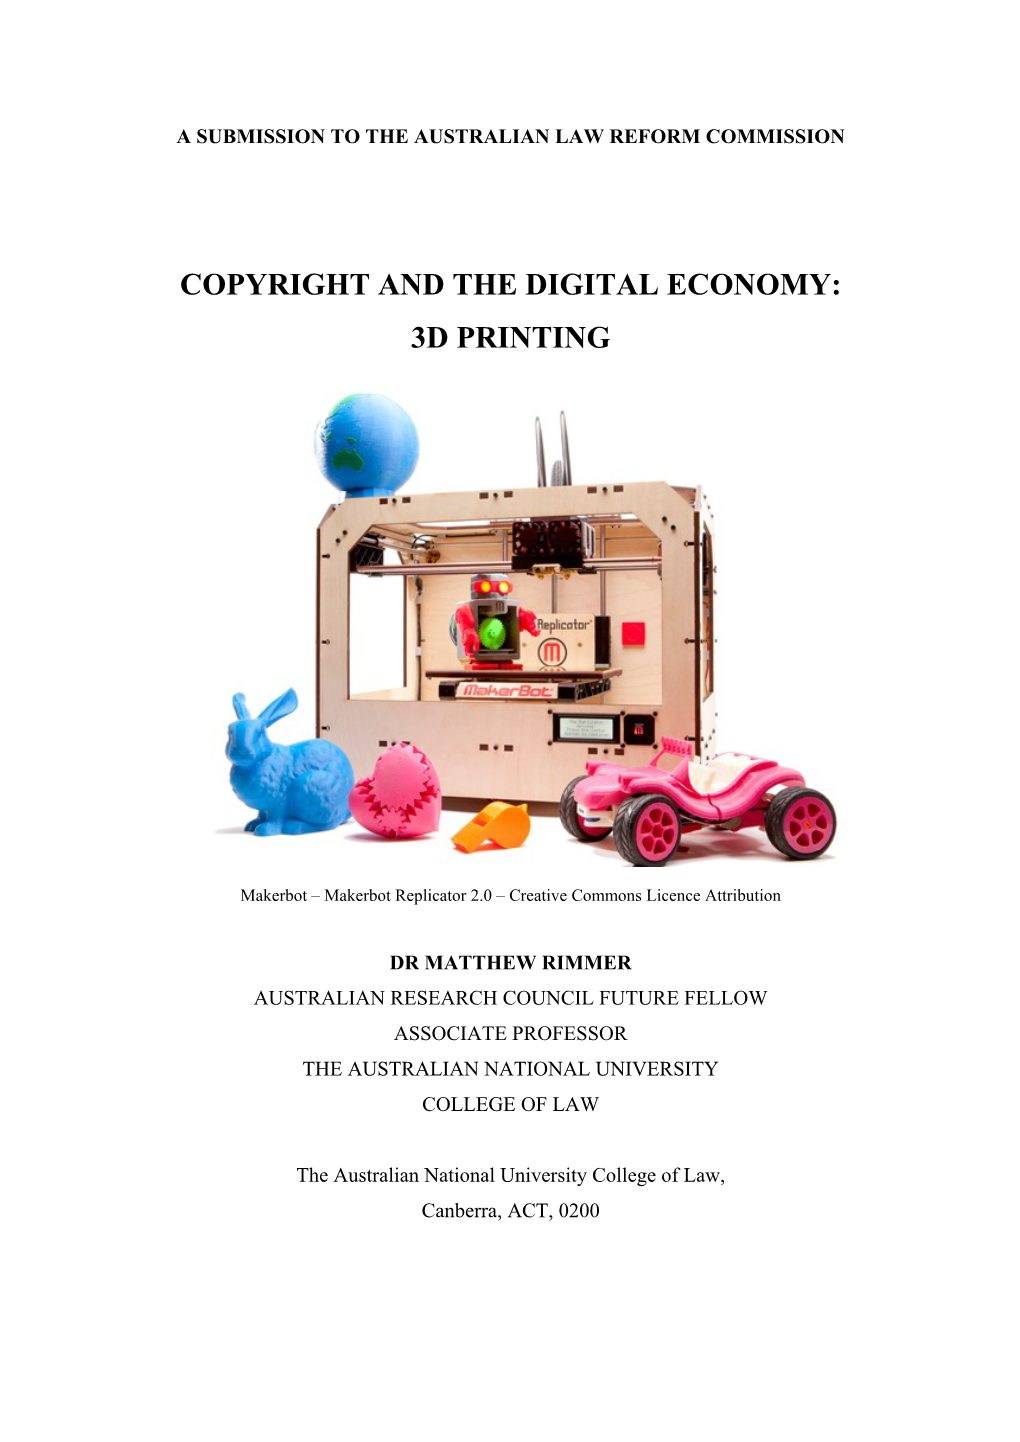 Copyright and the Digital Economy: 3D Printing